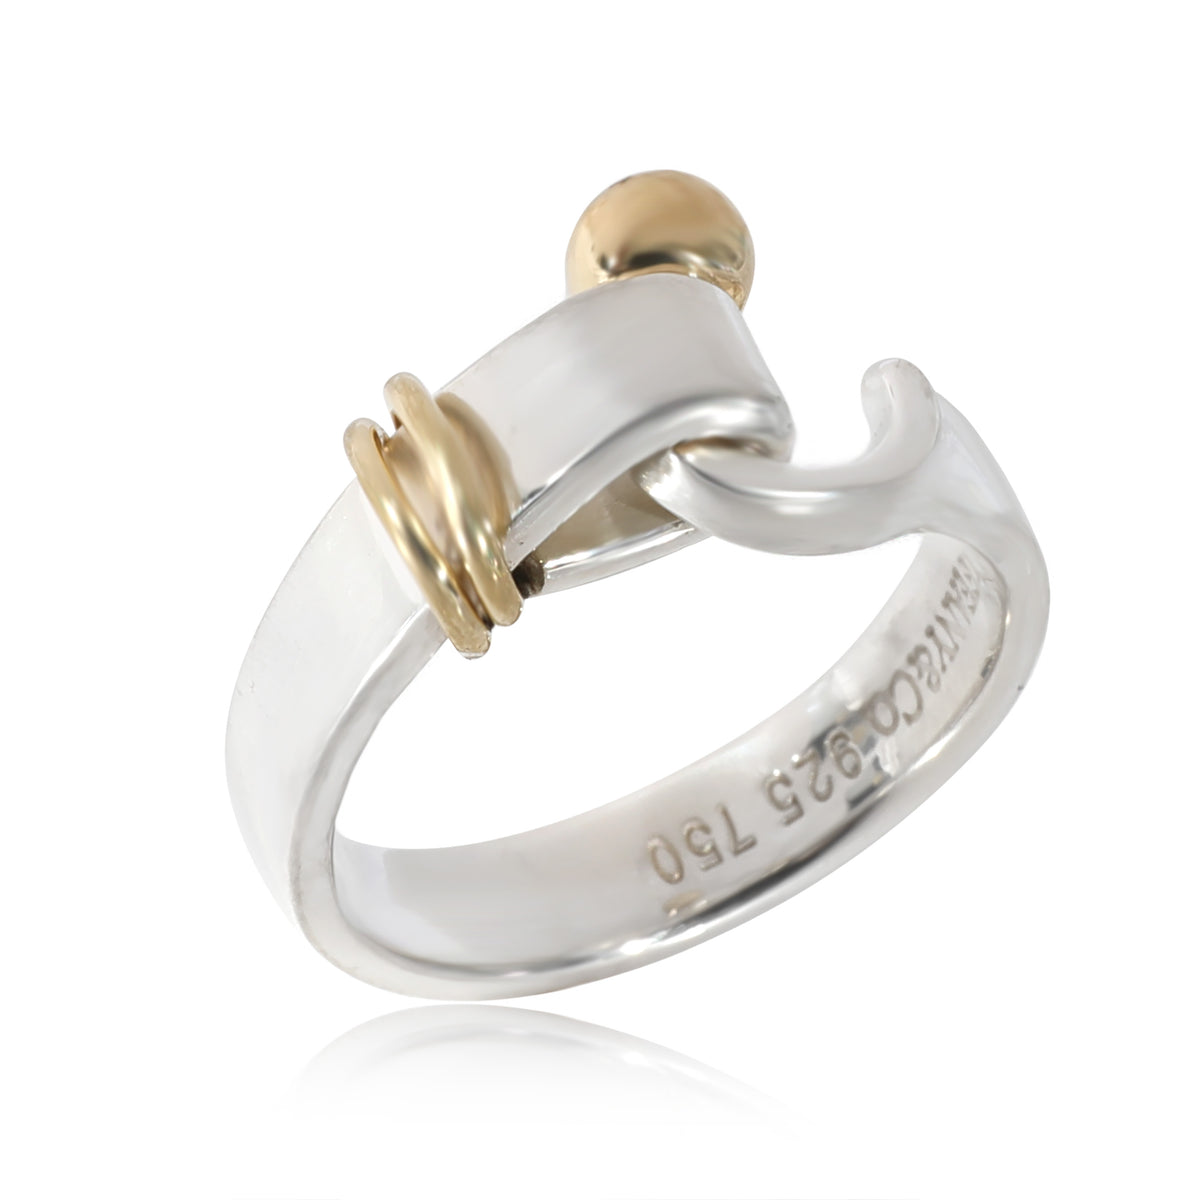 Tiffany & Co. Hook Ring in Sterling Silver & 18k Yellow Gold/Sterling Silver